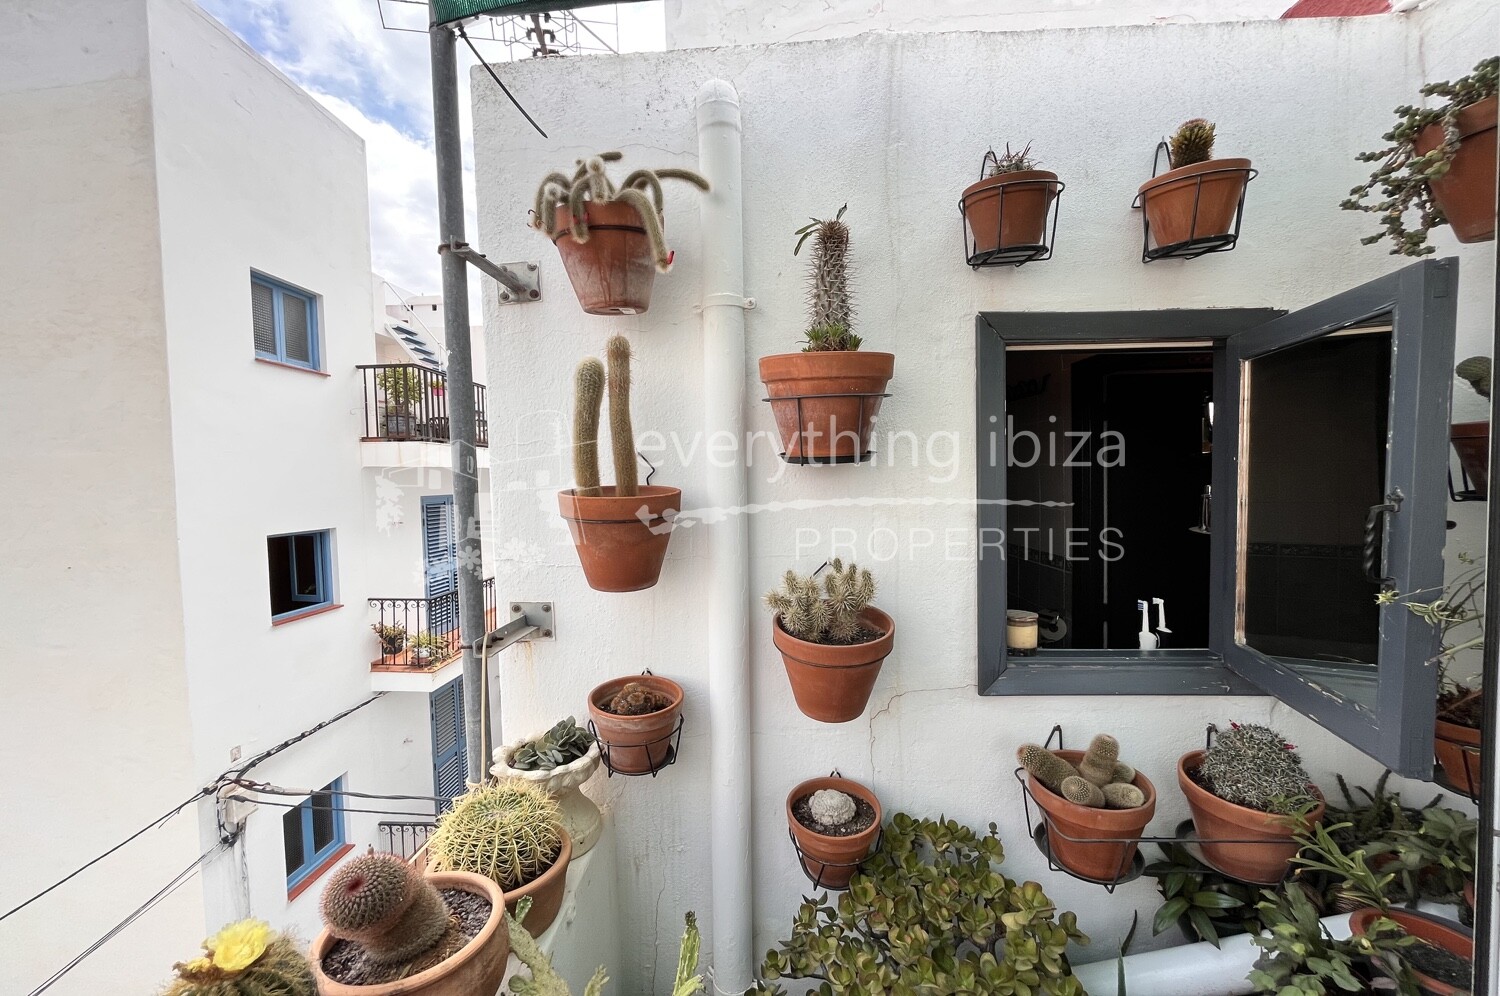 Lovely Renovated Duplex Apartment with Outdoor Terrace, ref. 1615, for sale in Ibiza by everything ibiza Properties